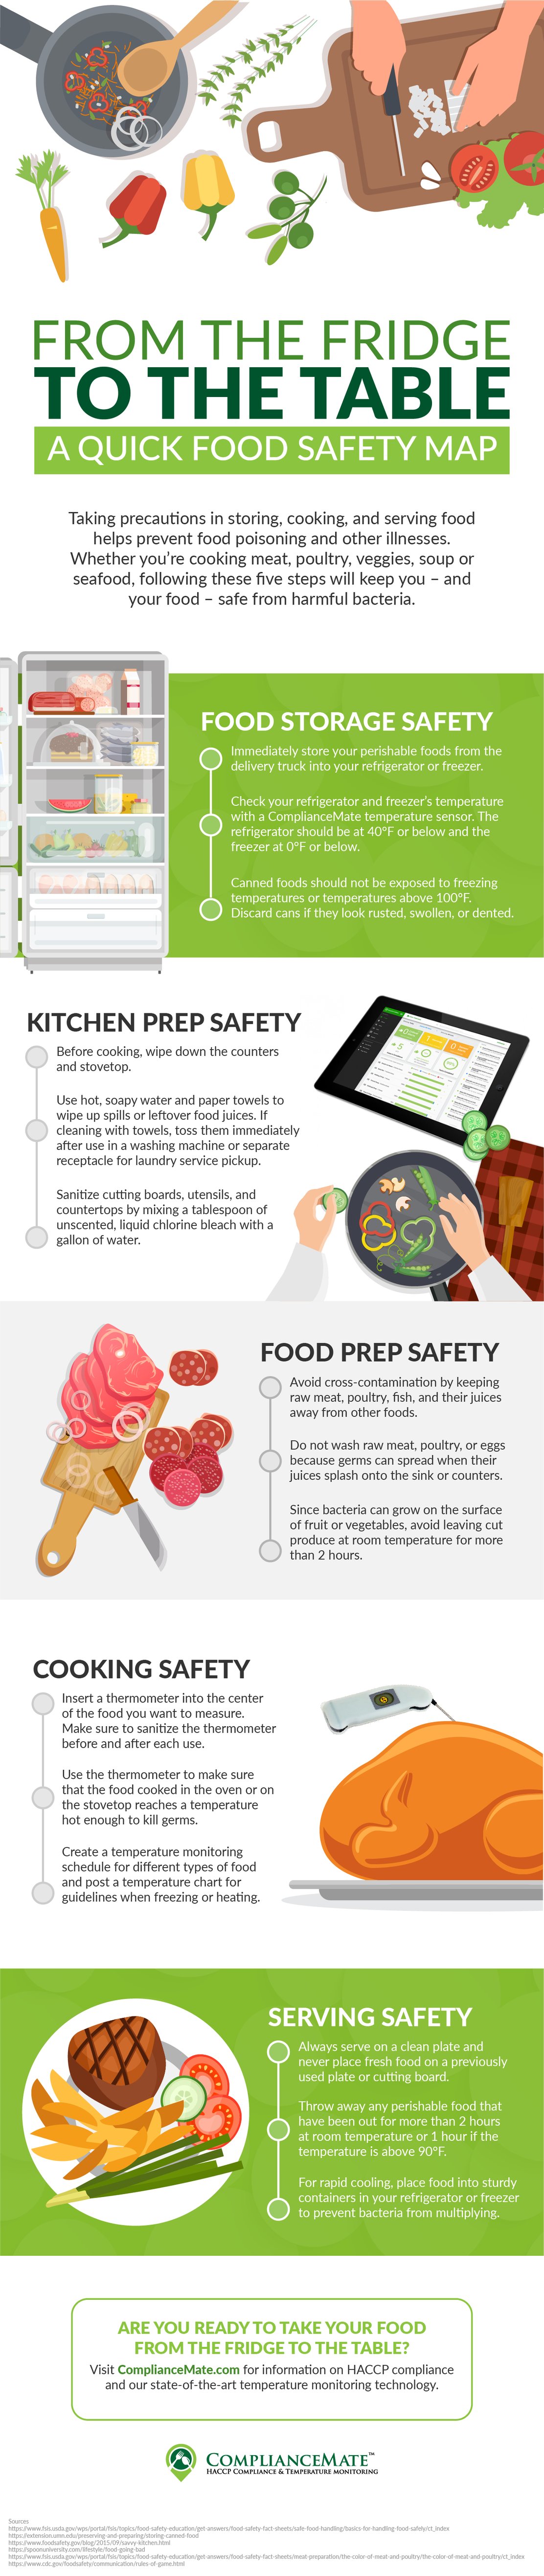 Infographic - A Quick Food Safety Map